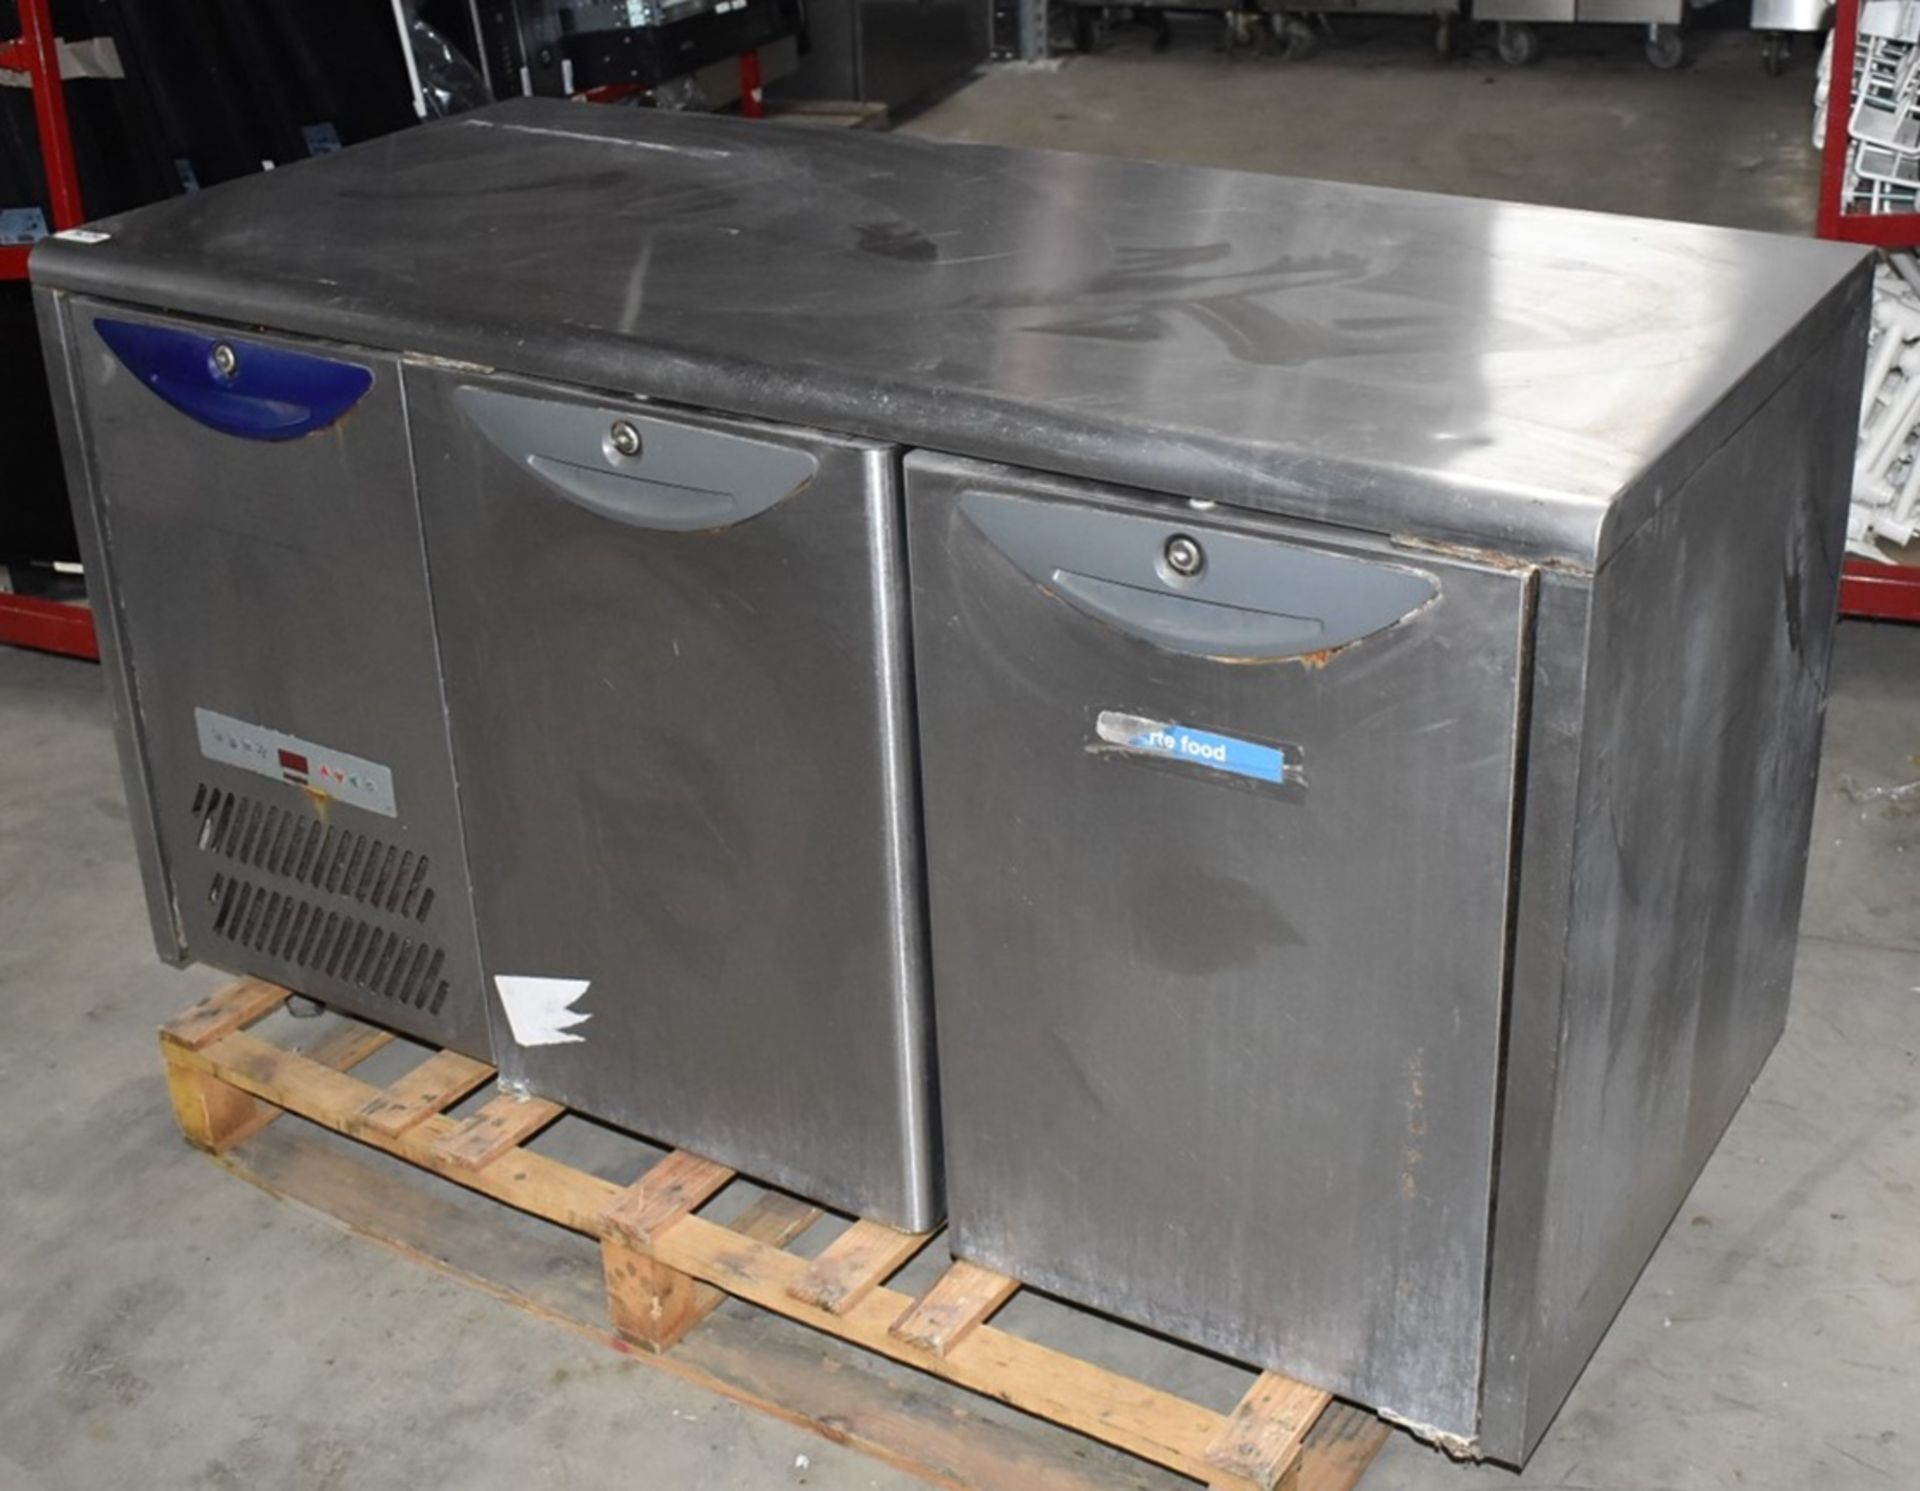 1 x Williams Two Door Countertop Refrigerator With Stainless Steel Exterior - Removed From a - Image 2 of 6